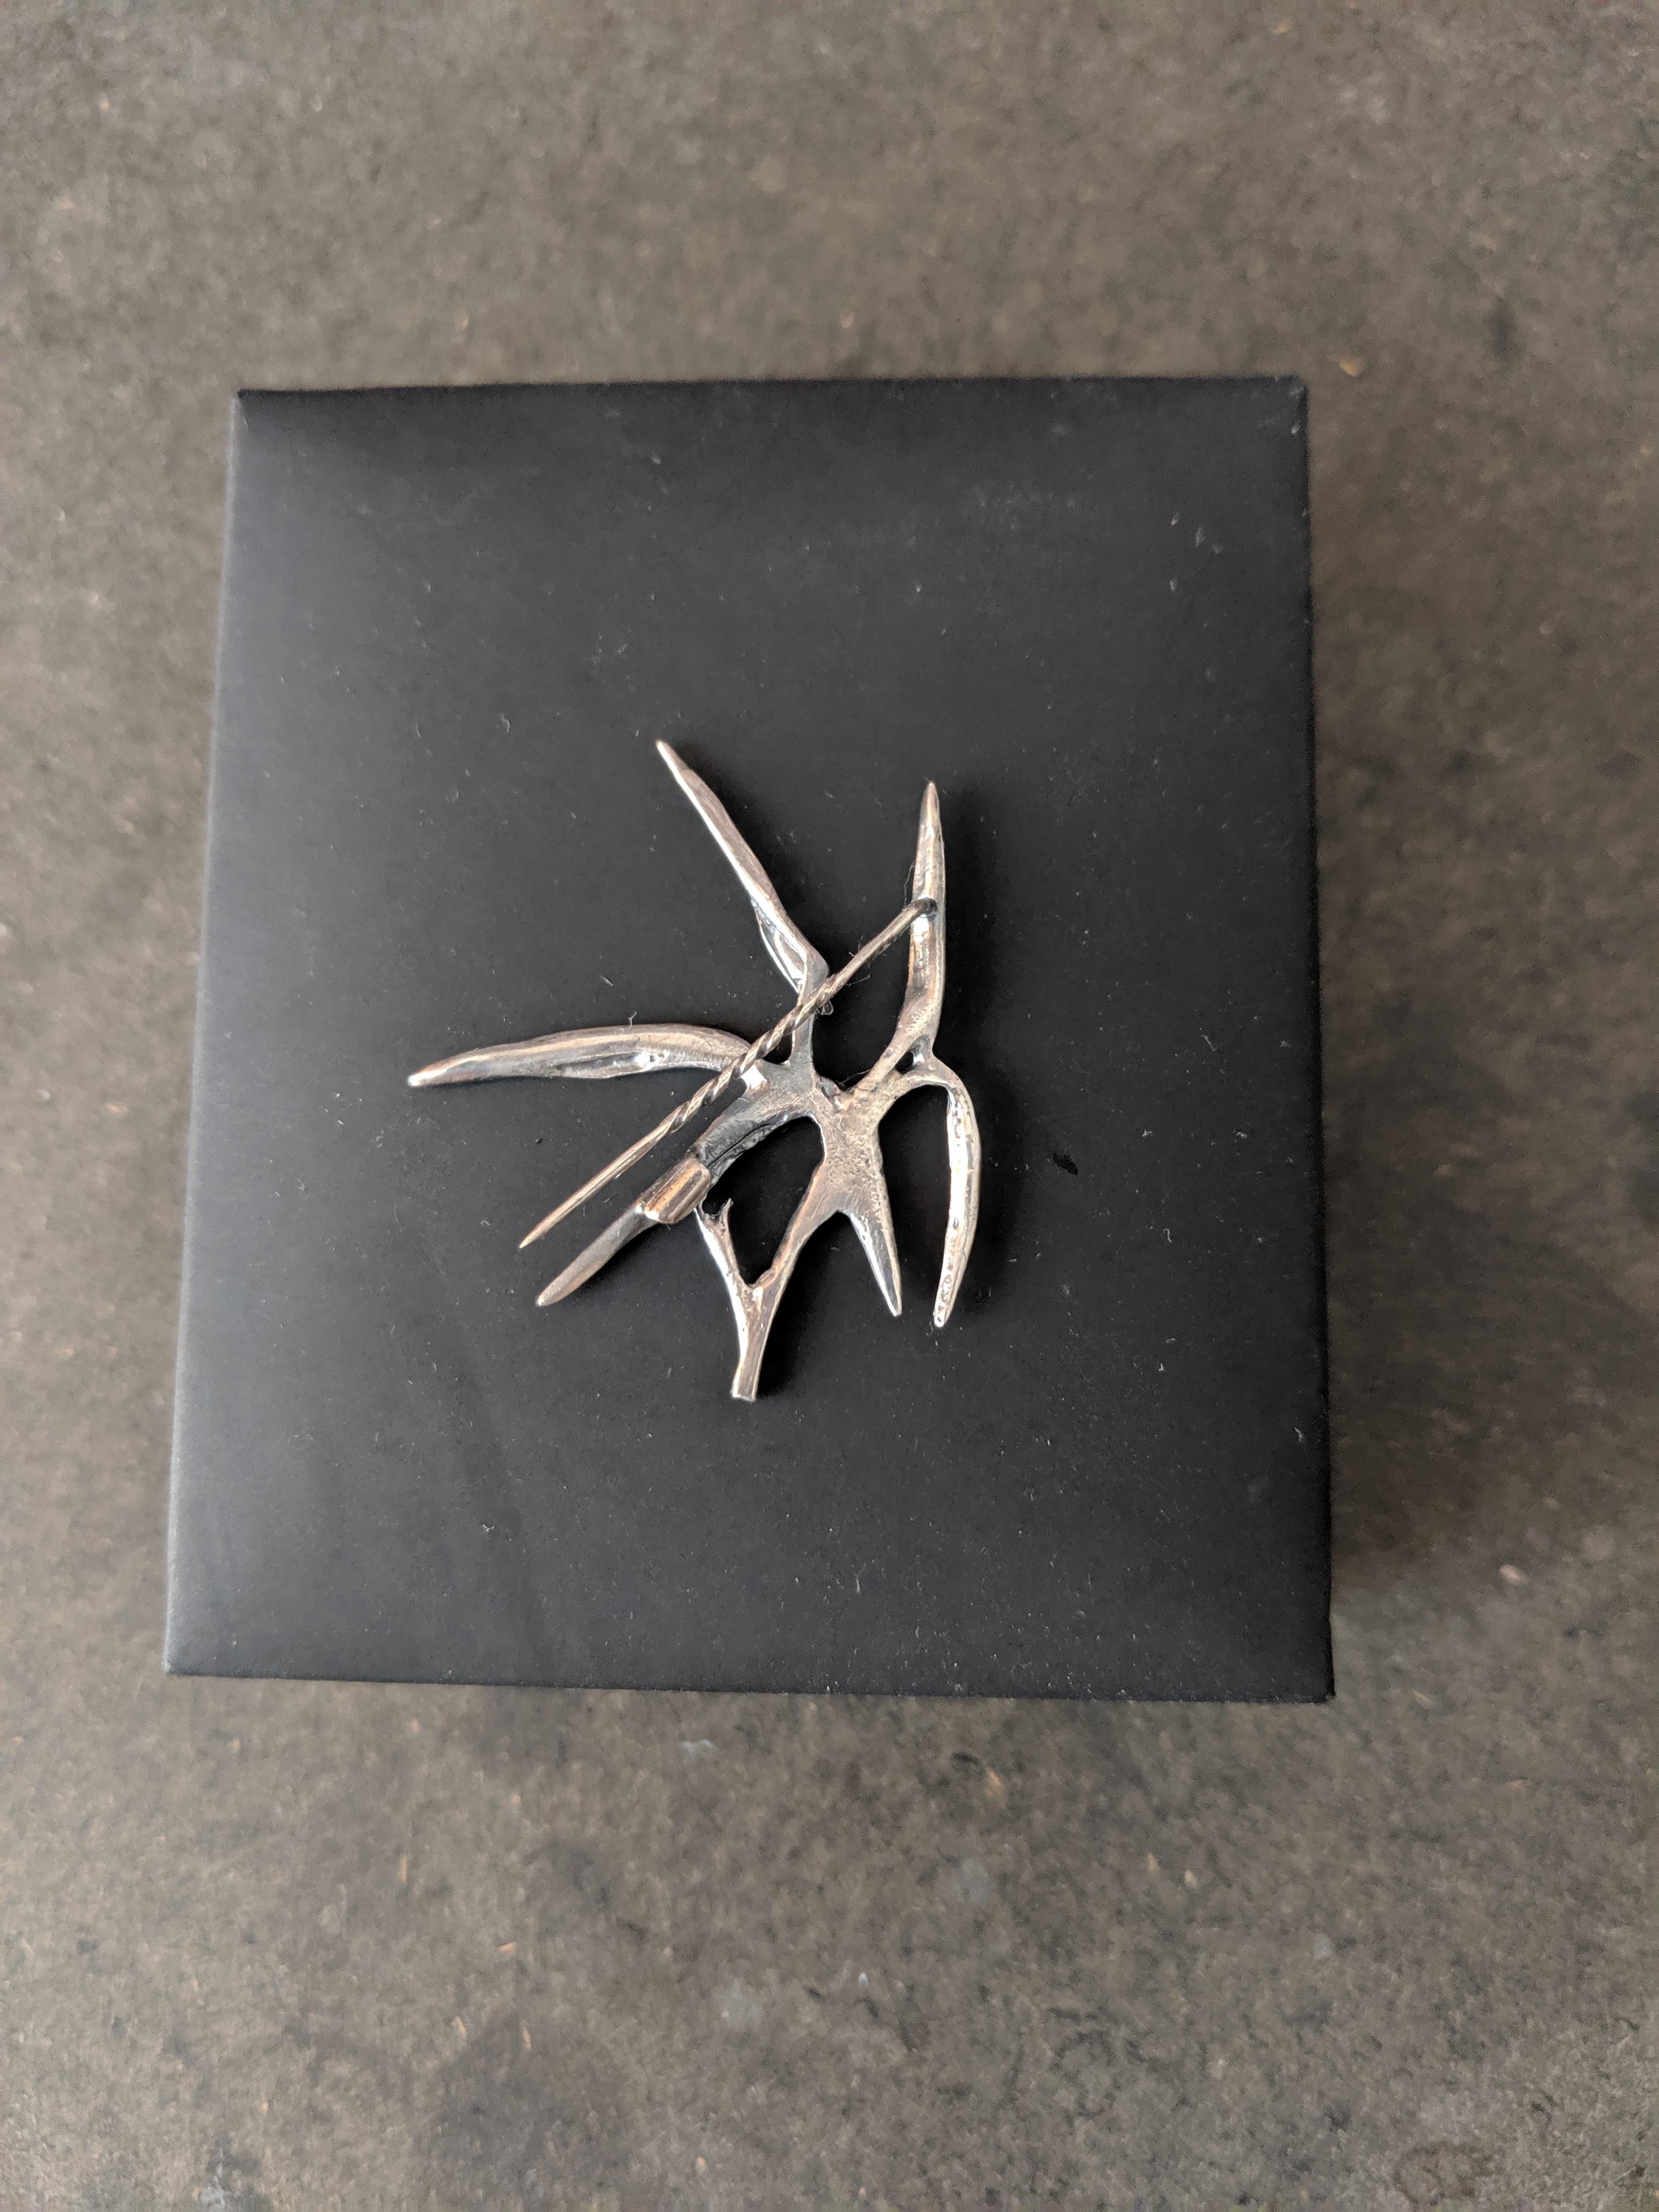 Wabi-Sabi Contemporary Man Brooch in Sterling Silver N1 Designed by the Artist For Sale 4